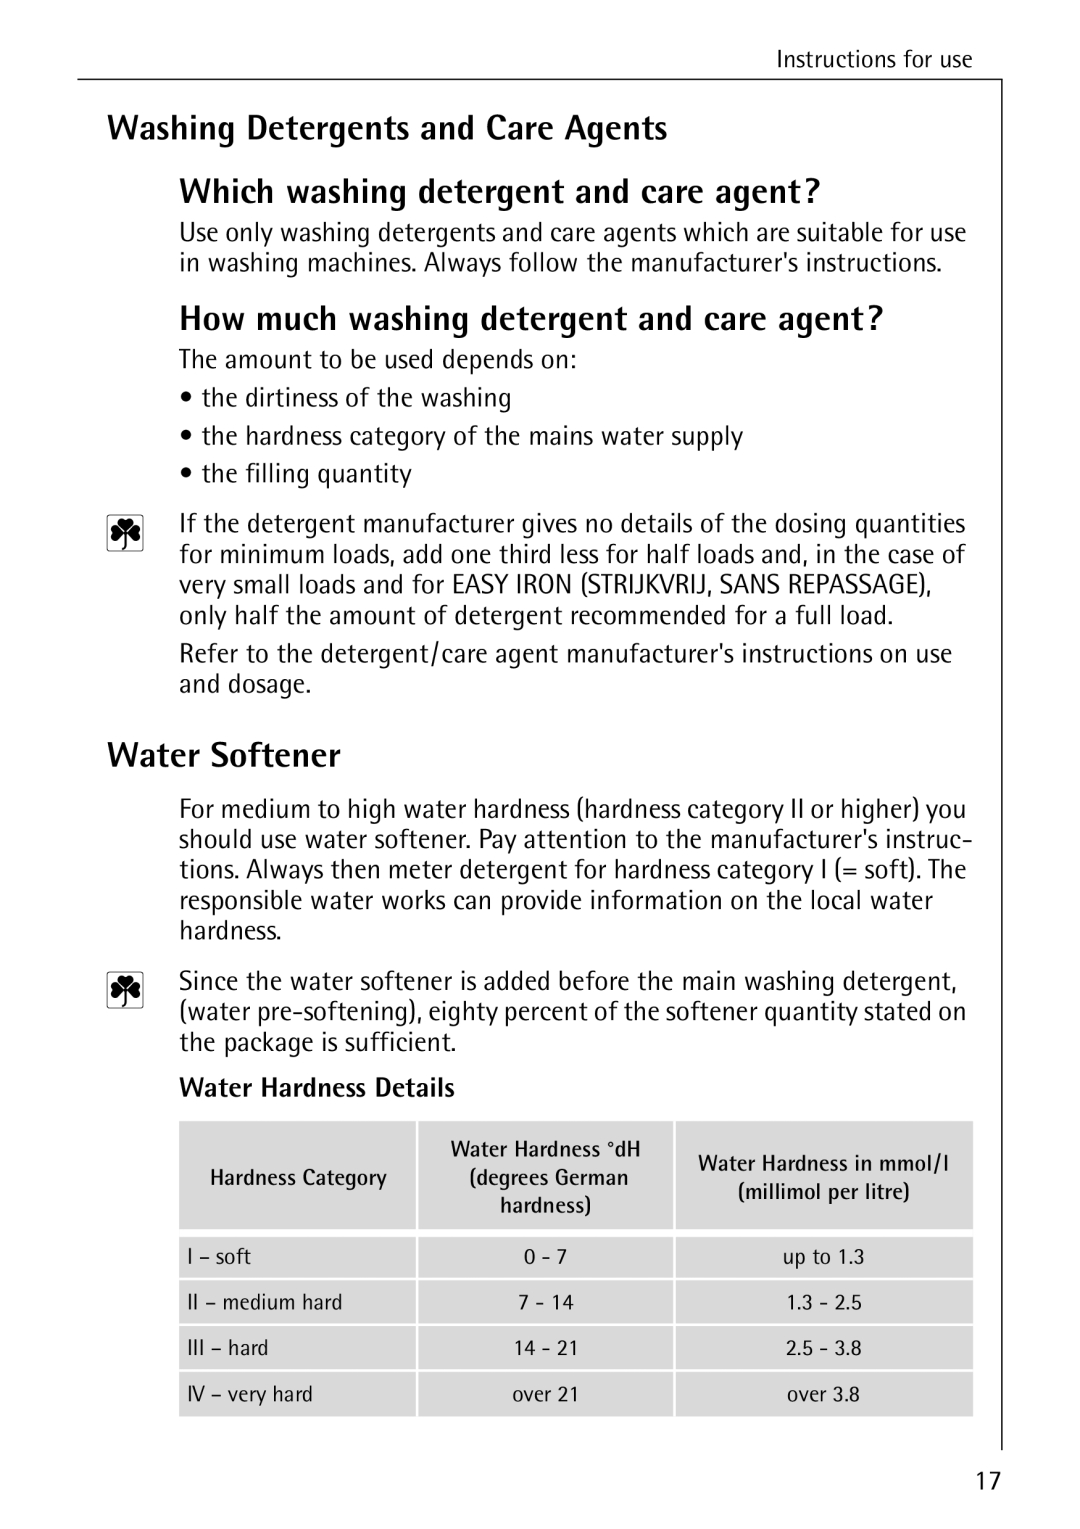 AEG 82730 manual How much washing detergent and care agent?, Water Softener 